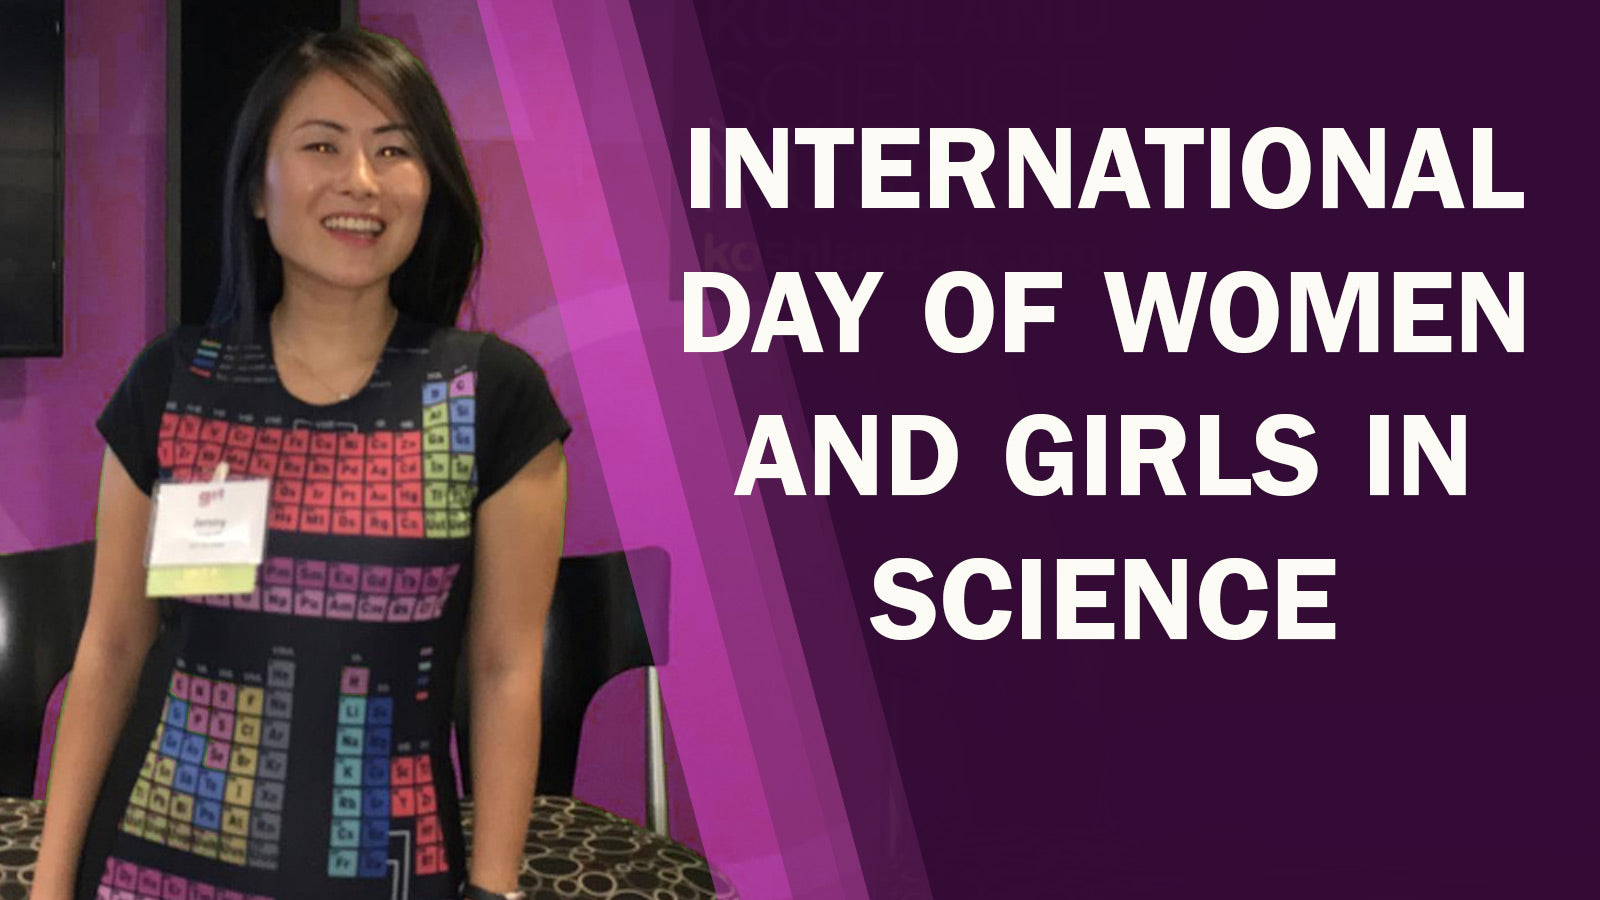 International Day of Women and Girls in Science 2018